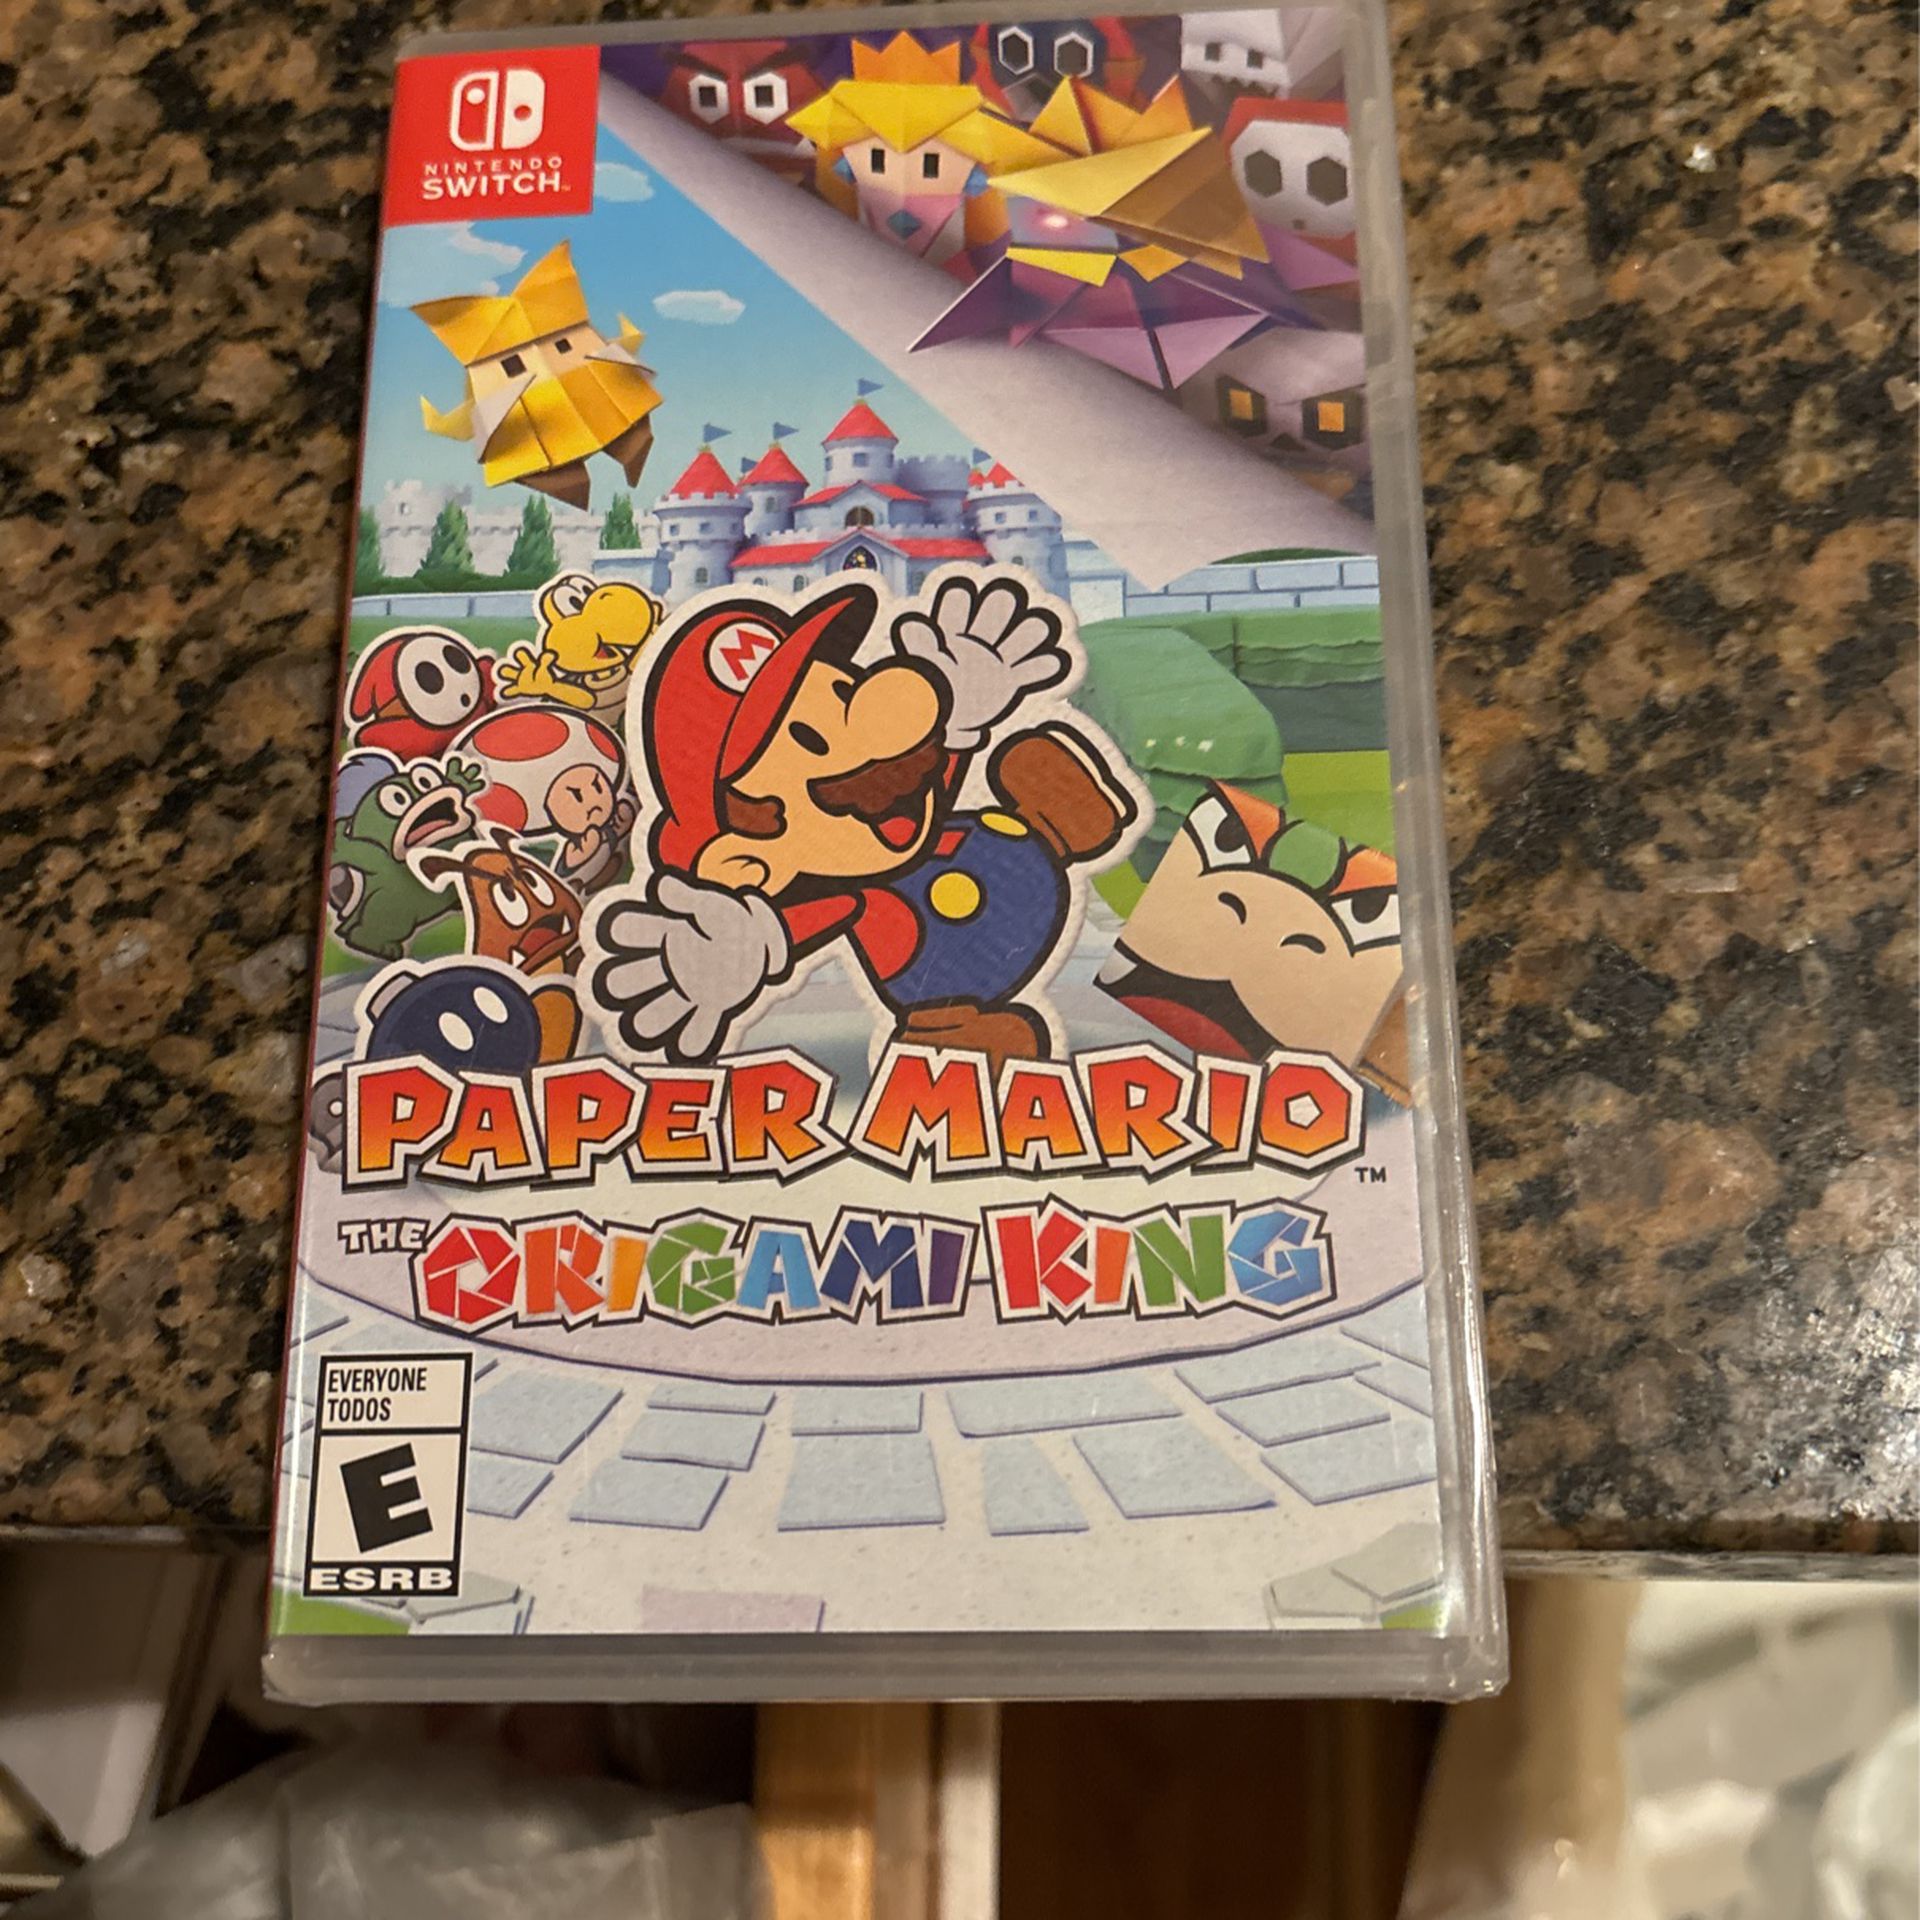 Paper Mario Nintendo Switch Video Game The Origami King Rated E for Everyone 